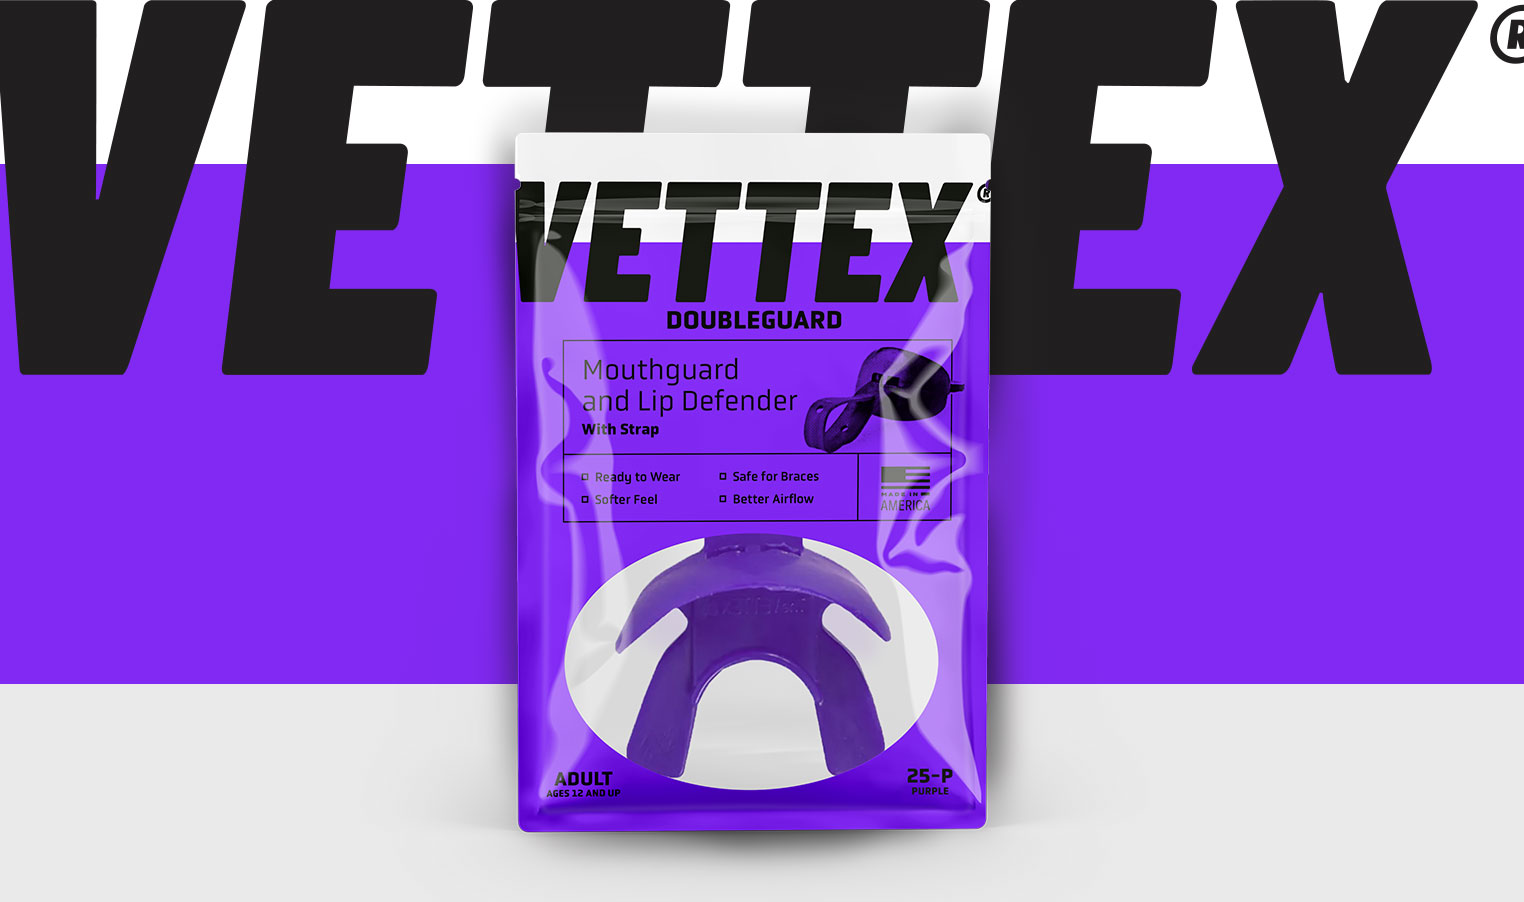 Vettex mouthguard packaging design in purple